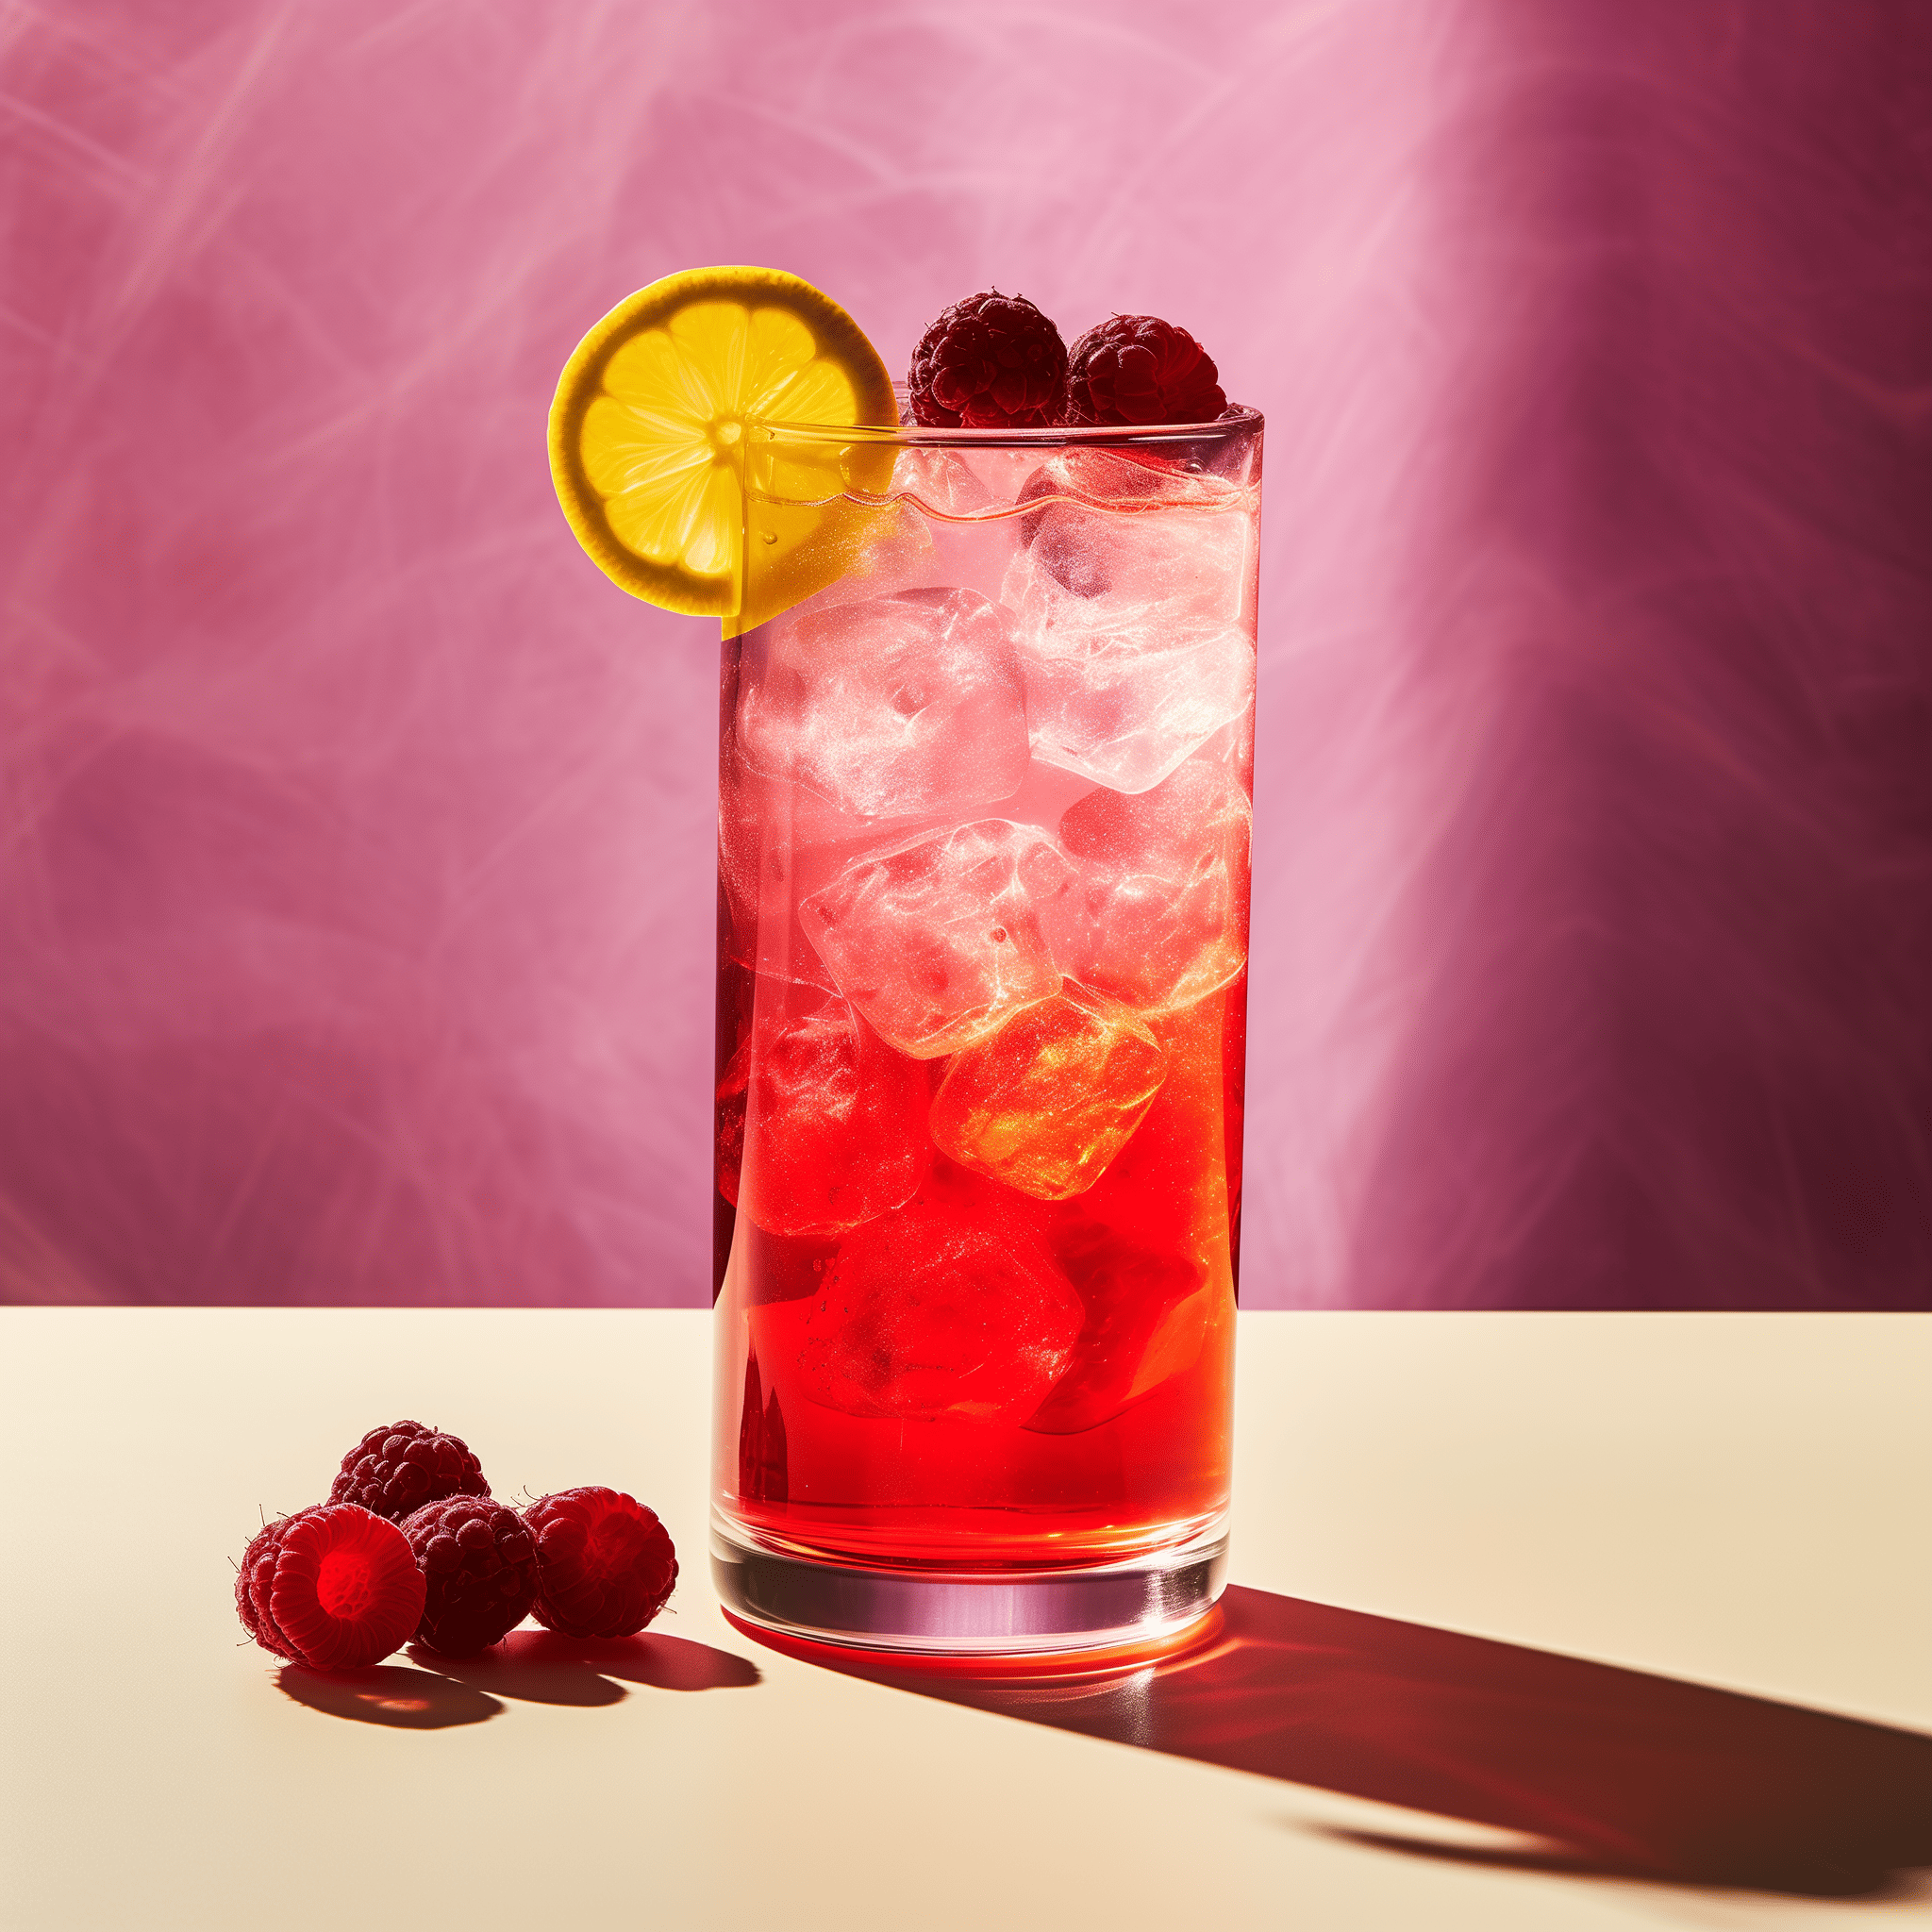 Berry Gin and Tonic Cocktail Recipe - The Berry Gin and Tonic tastes refreshingly crisp with a harmonious blend of juniper from the gin and the sweet-tartness of the berries. The effervescence of the tonic water adds a lightness that makes it a delightful sipper.